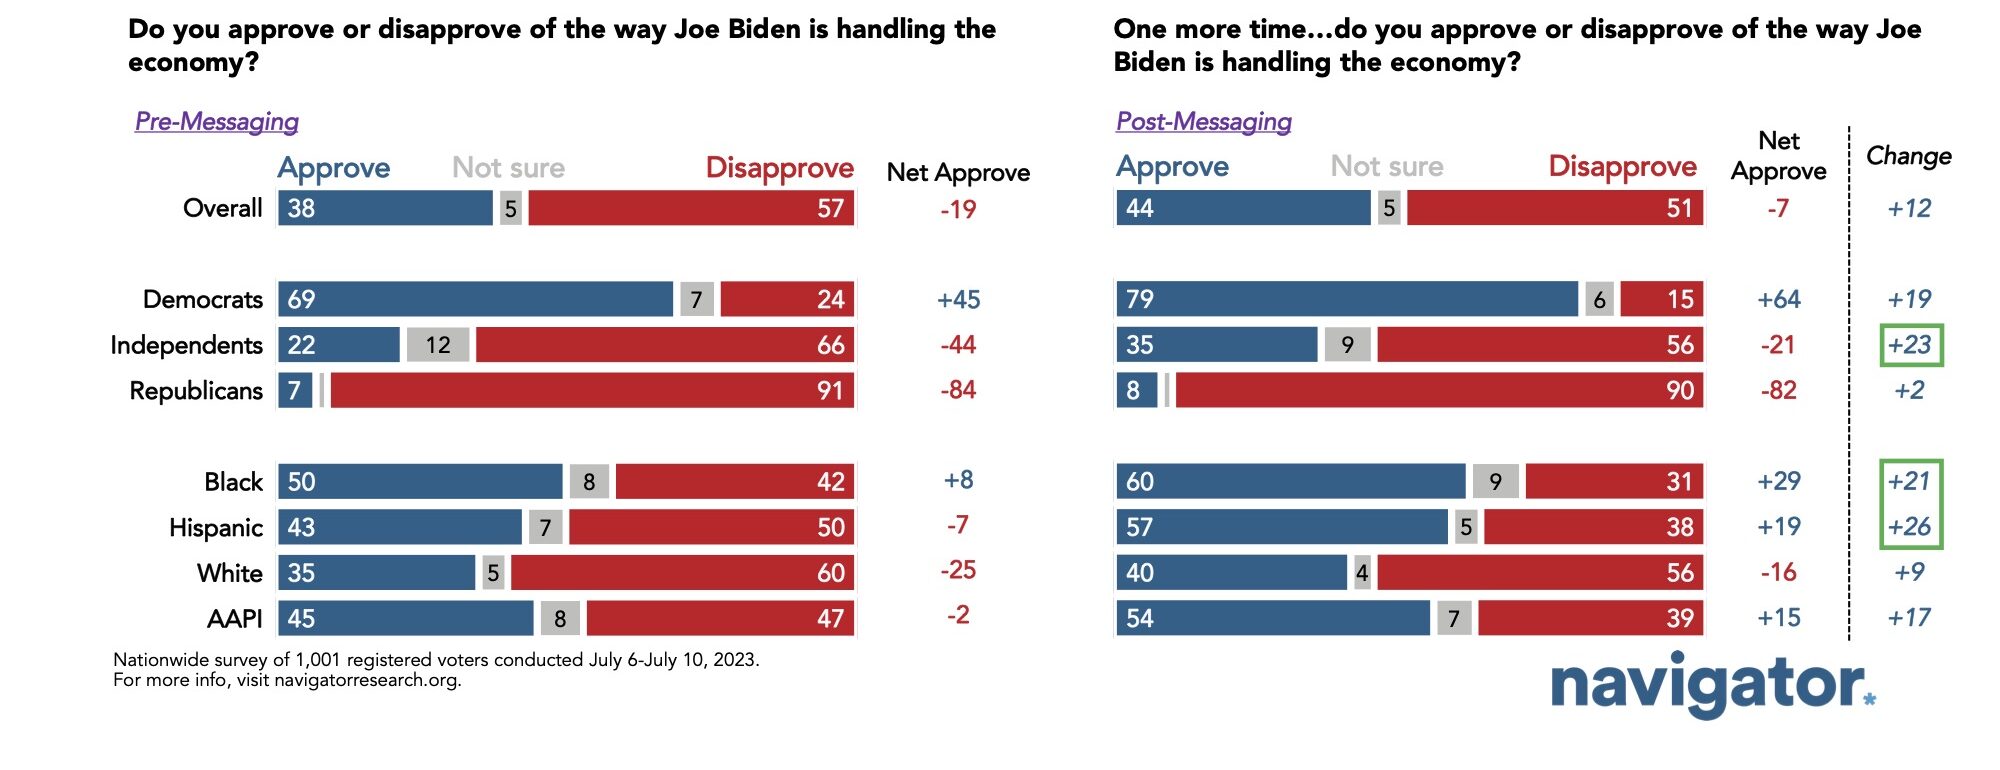 Survey results to the following question: Do you approve or disapprove of the way Joe Biden is handling the economy?